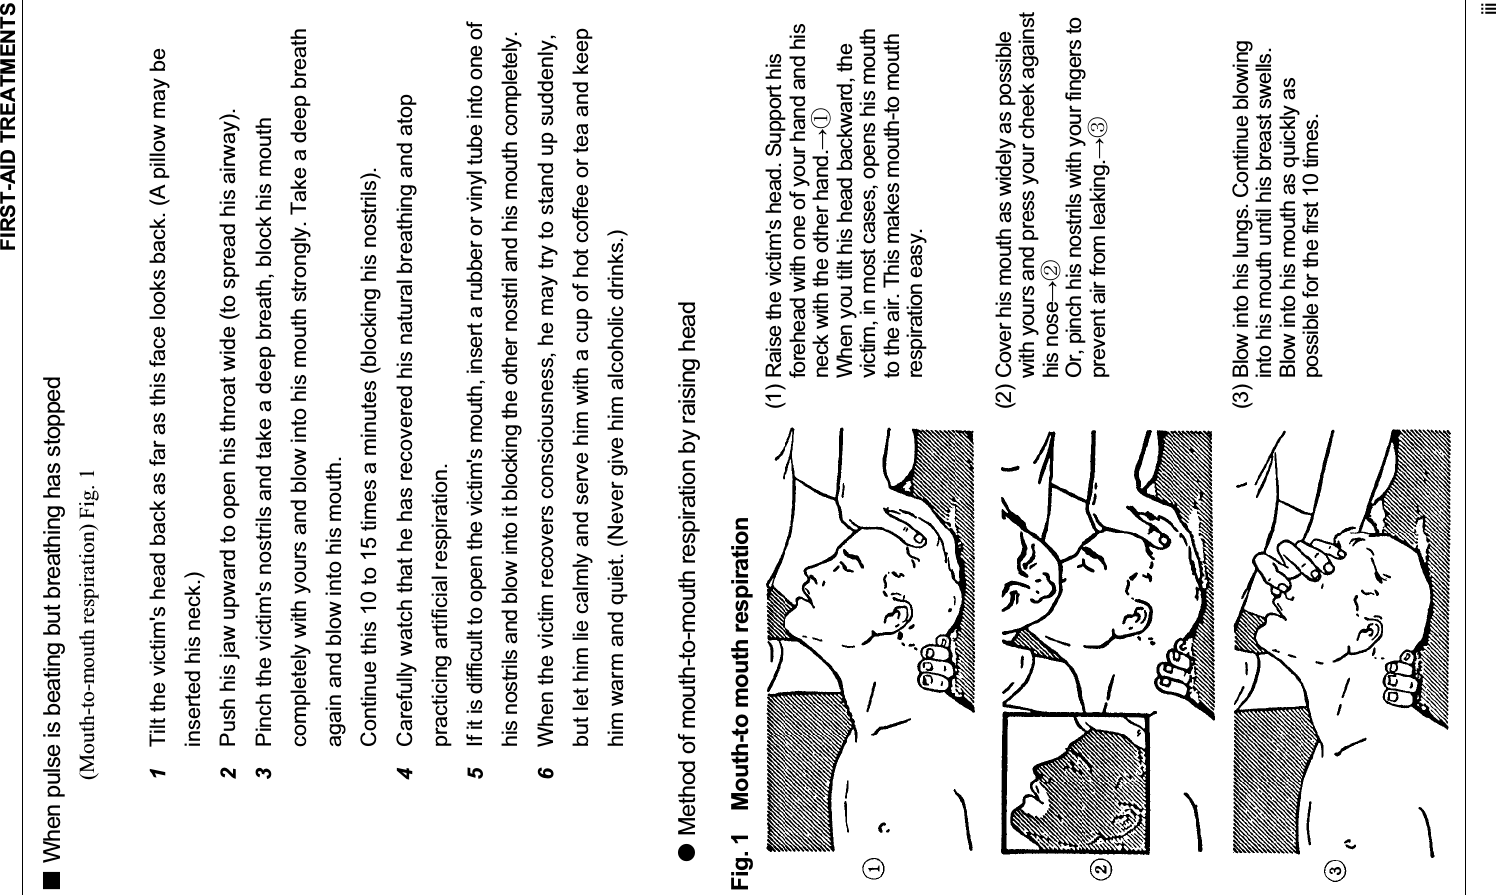 FIRST-AID TREATMENTS iii When pulse is beating but breathing has stopped (Mouth-to-mouth respiration) Fig. 1 1Tilt the victim&apos;s head back as far as this face looks back. (A pillow may be inserted his neck.) 2Push his jaw upward to open his throat wide (to spread his airway). 3Pinch the victim&apos;s nostrils and take a deep breath, block his mouth completely with yours and blow into his mouth strongly. Take a deep breath again and blow into his mouth. Continue this 10 to 15 times a minutes (blocking his nostrils). 4Carefully watch that he has recovered his natural breathing and atop practicing artificial respiration. 5If it is difficult to open the victim&apos;s mouth, insert a rubber or vinyl tube into one of his nostrils and blow into it blocking the other nostril and his mouth completely. 6When the victim recovers consciousness, he may try to stand up suddenly, but let him lie calmly and serve him with a cup of hot coffee or tea and keep him warm and quiet. (Never give him alcoholic drinks.) z Method of mouth-to-mouth respiration by raising head Fig. 1    Mouth-to mouth respiration (1) Raise the victim&apos;s head. Support his forehead with one of your hand and his neck with the other hand.ձ  When you tilt his head backward, the victim, in most cases, opens his mouth to the air. This makes mouth-to mouth respiration easy. (2) Cover his mouth as widely as possible with yours and press your cheek against his noseղ  Or, pinch his nostrils with your fingers to prevent air from leaking.ճ(3) Blow into his lungs. Continue blowing into his mouth until his breast swells.   Blow into his mouth as quickly as possible for the first 10 times. 